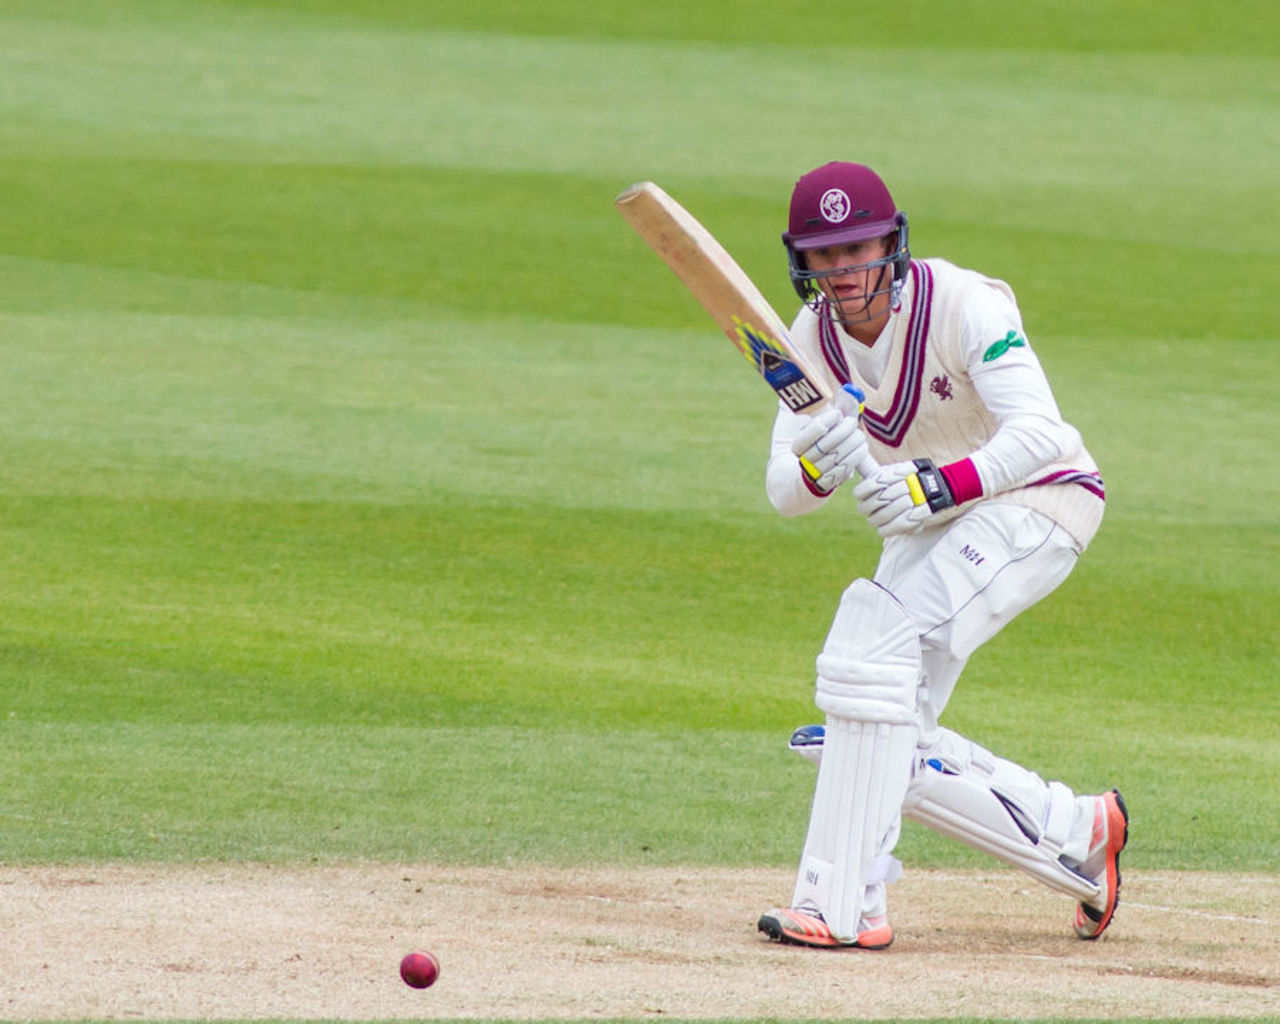 Tom Abell backed up Andy Flower's praise with a century at Edgbaston, Warwickshire v Somerset, Specsavers Championship Div 1, Edgbaston, May 8, 2016